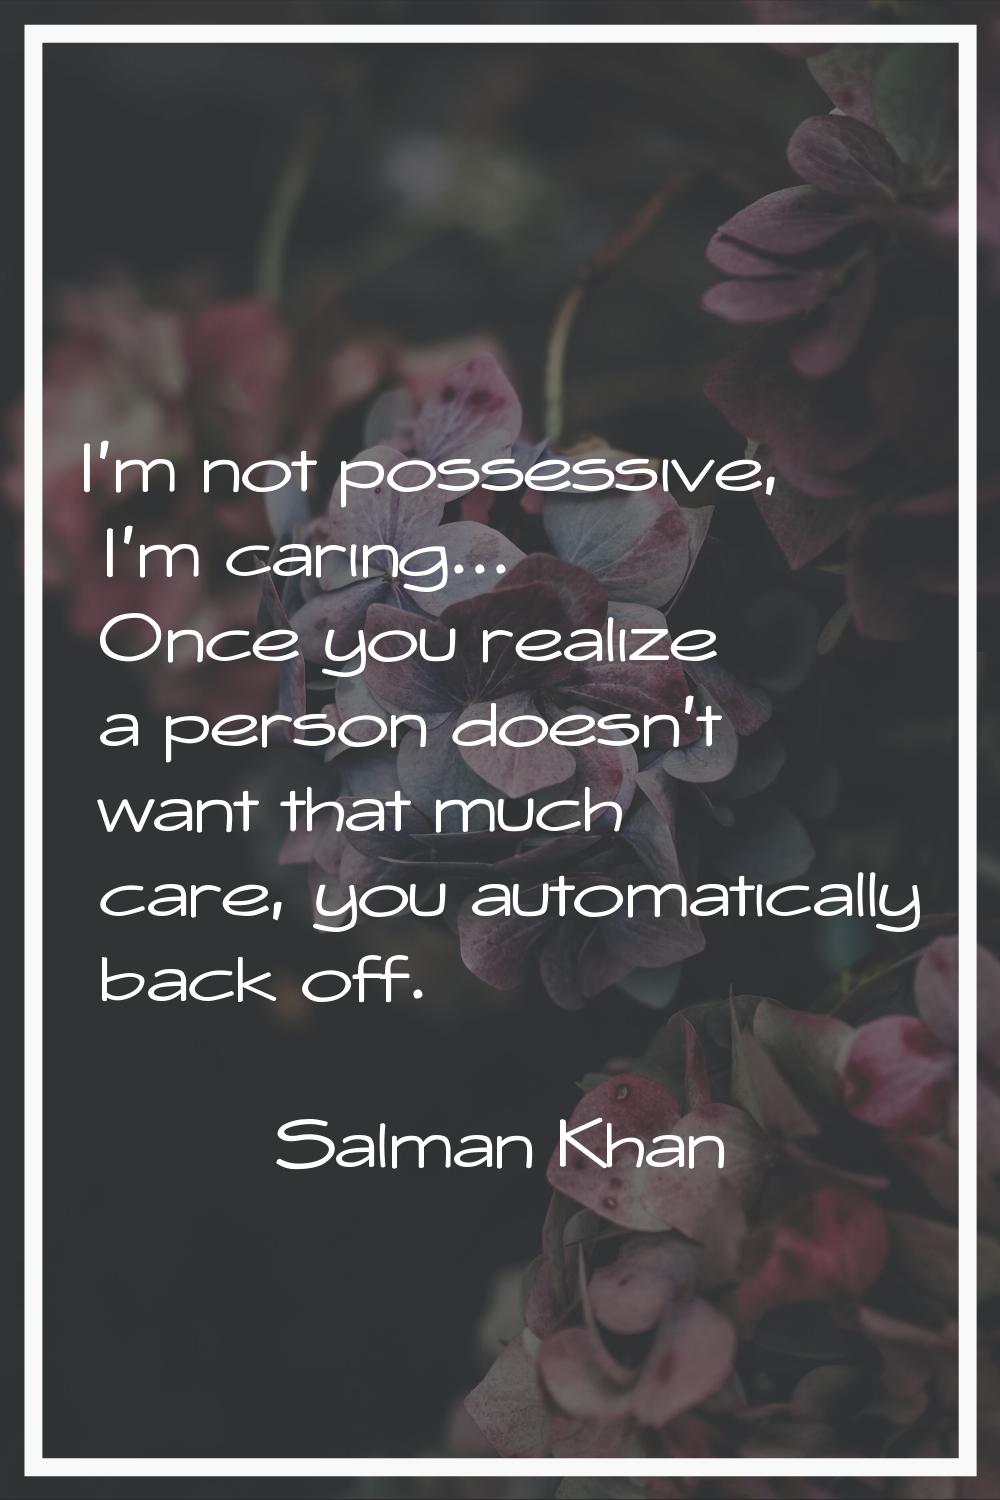 I'm not possessive, I'm caring... Once you realize a person doesn't want that much care, you automa